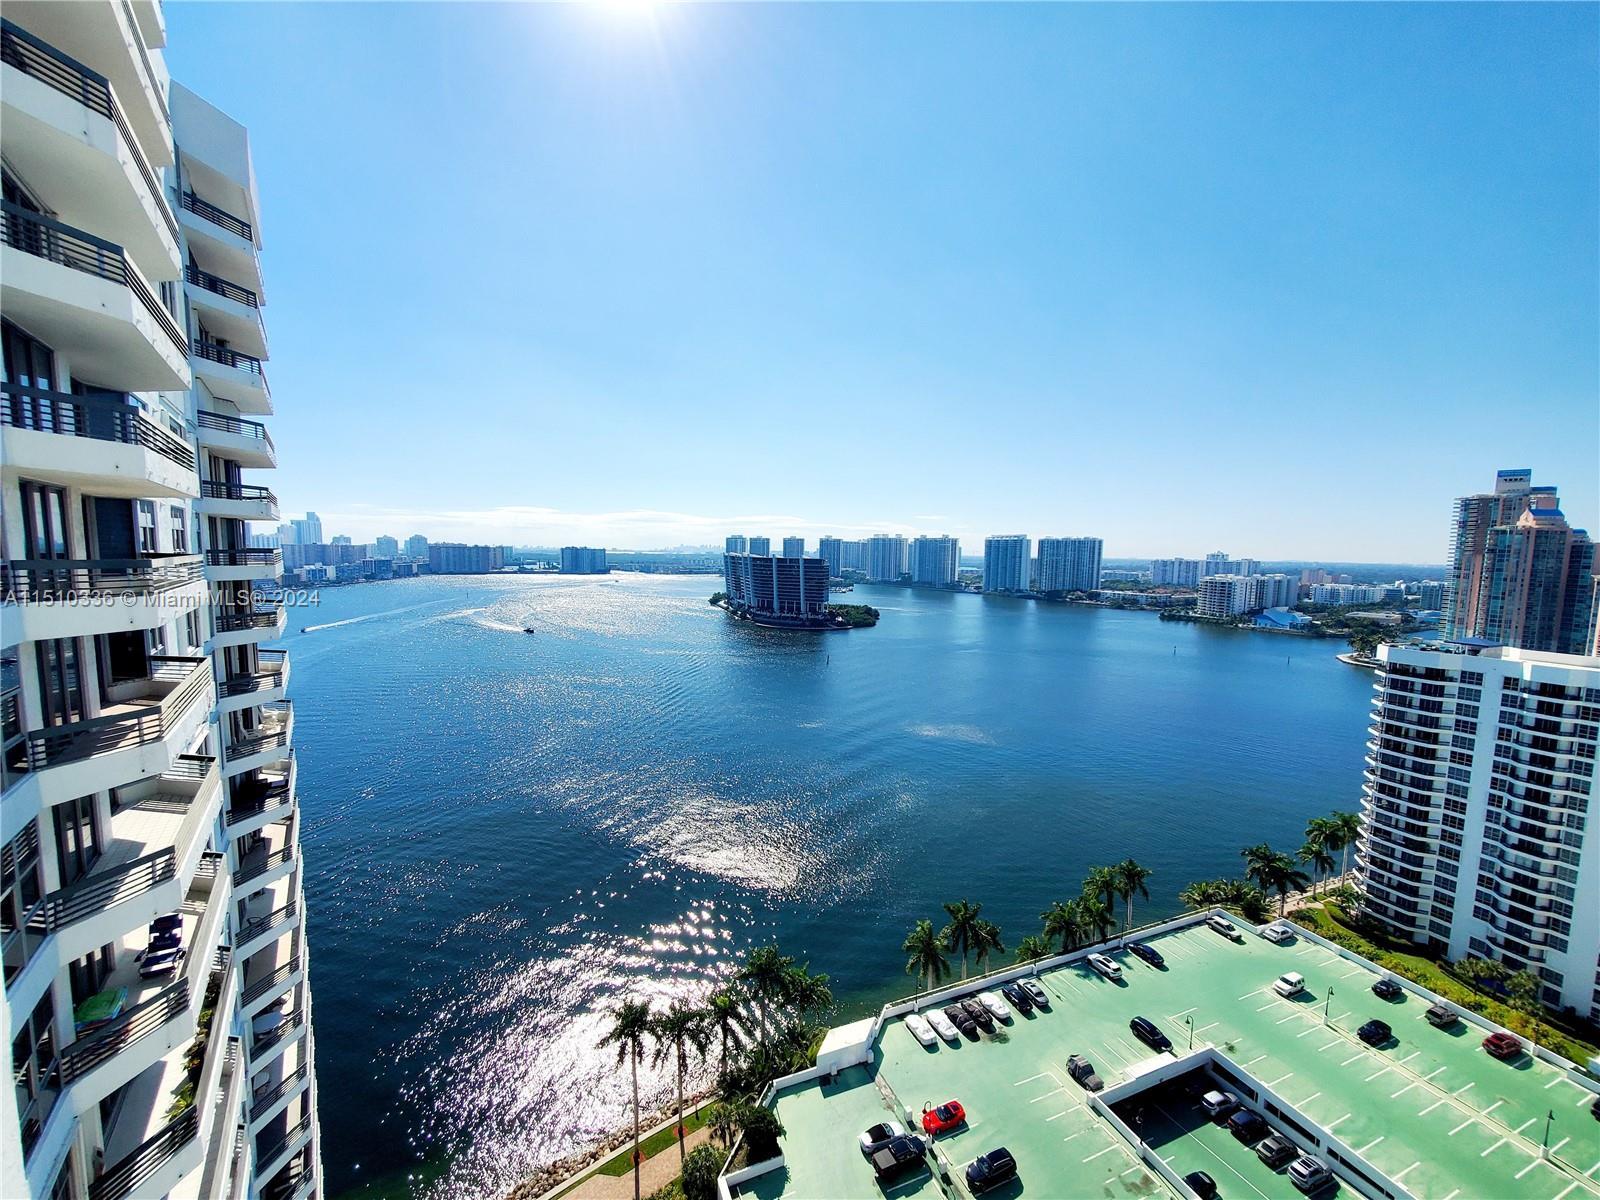 Discover the perfect waterfront condo in Aventura! This airy unit boasts an open floor plan with stu